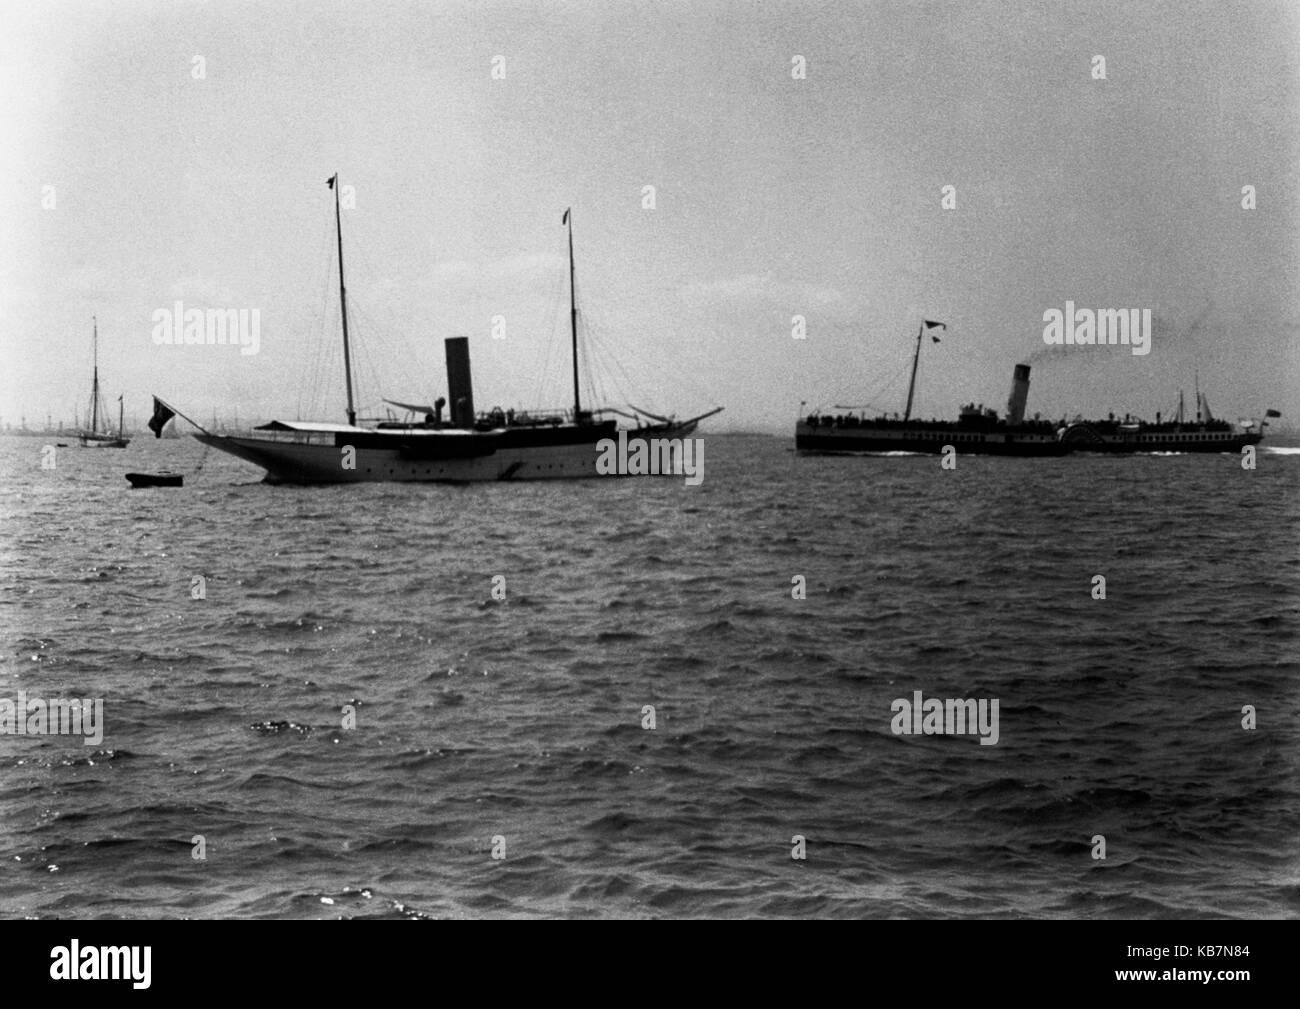 AJAXNETPHOTO. 1903. SOLENT, ENGLAND. - PADDLE STEAMER TRIPS - THE PADDLE STEAMER BALMORAL (RIGHT) PASSING A LARGE STEAM YACHT MOORED IN THE SOLENT. PHOTOGRAPHER:UNKNOWN © DIGITAL IMAGE COPYRIGHT AJAX VINTAGE PICTURE LIBRARY SOURCE: AJAX VINTAGE PICTURE LIBRARY COLLECTION REF:AVL 0573 Stock Photo